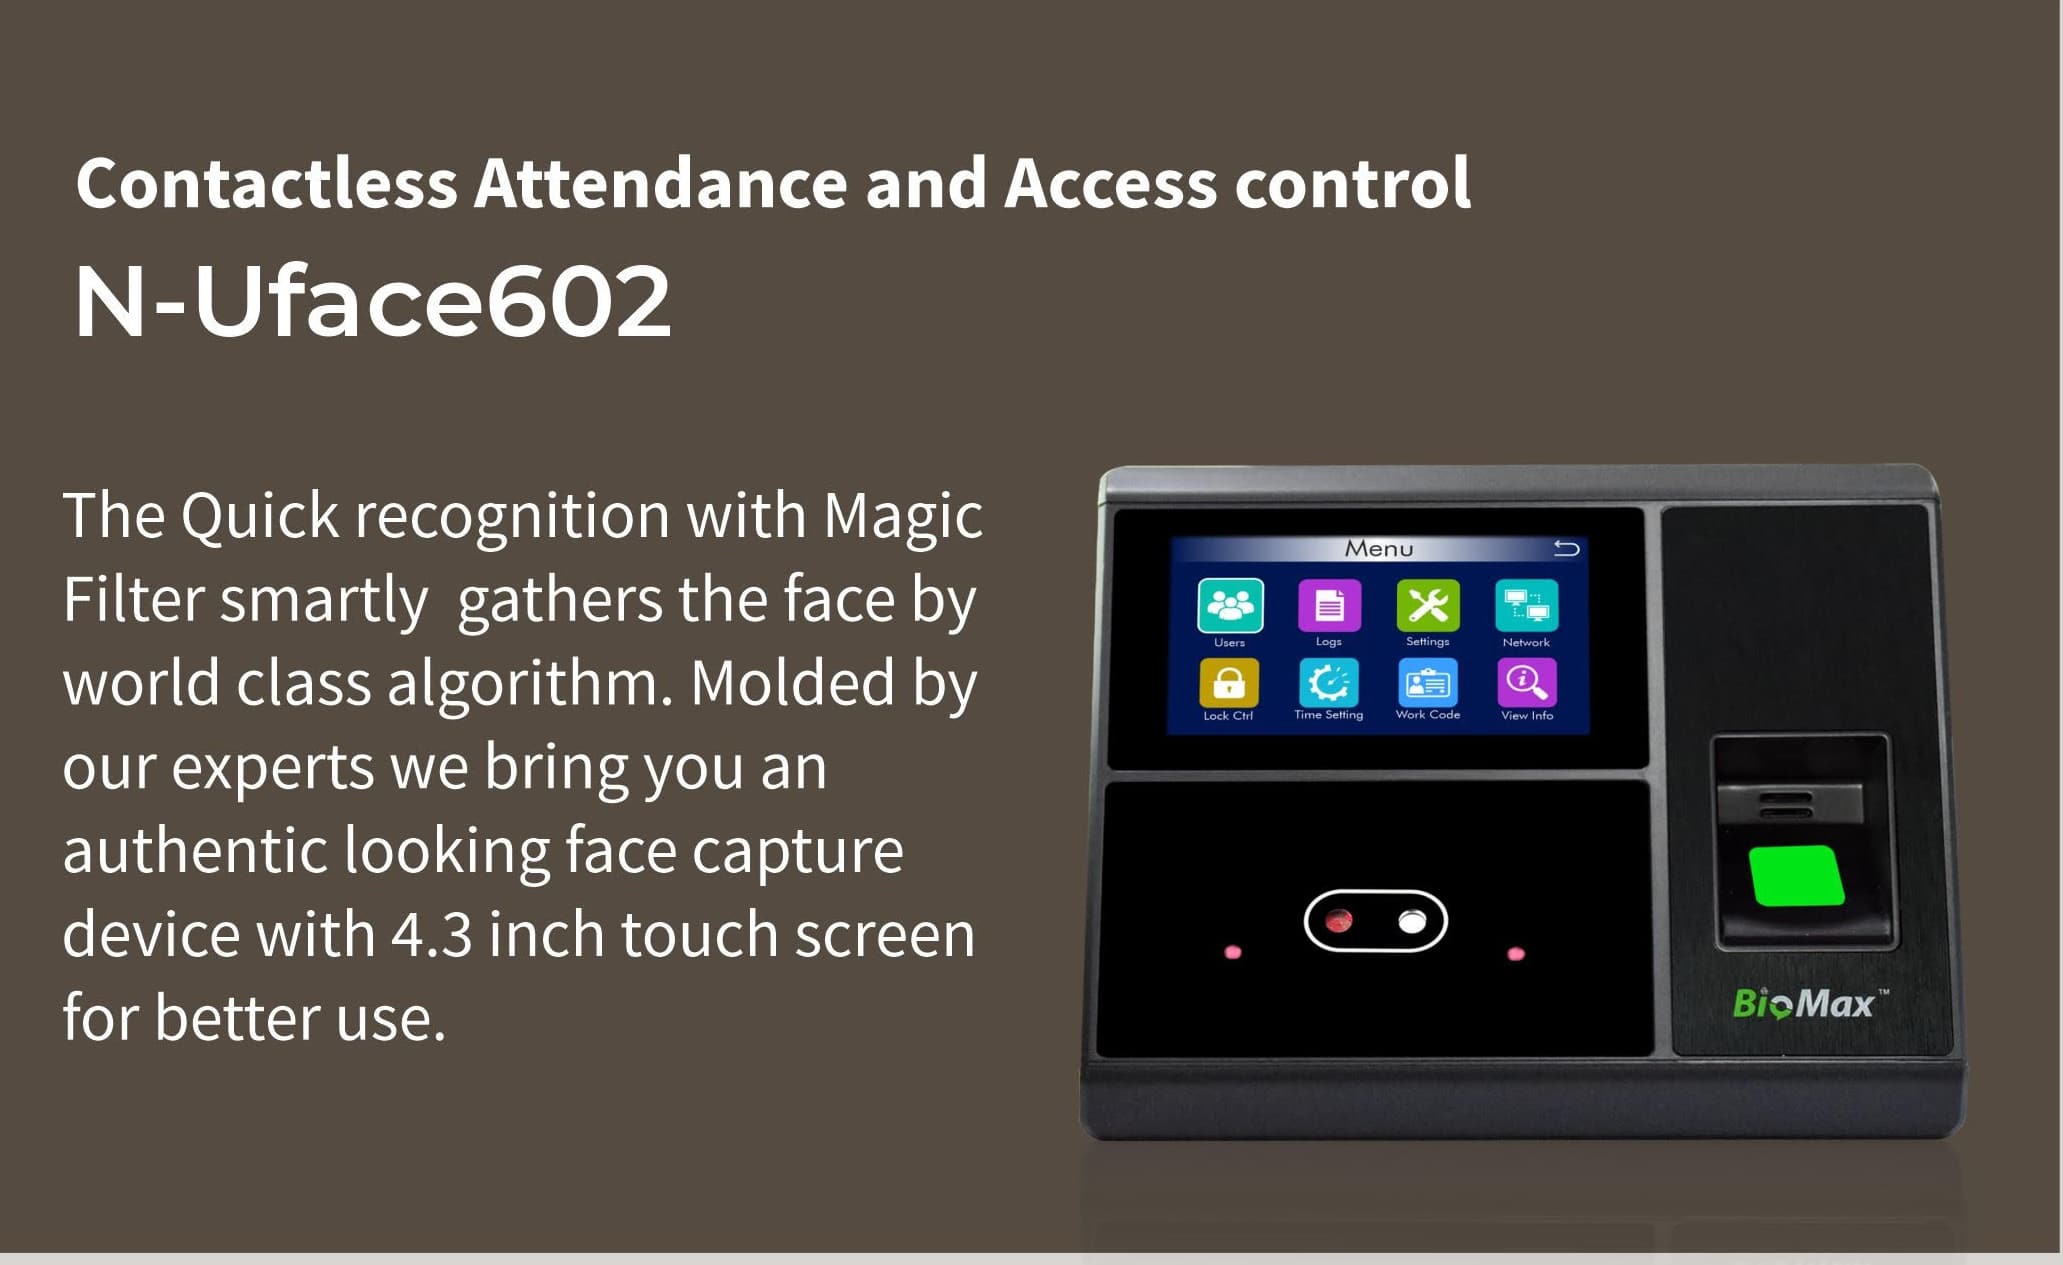 FACIAL-BASED-ATTENDANCE-AND-ACCESS-CONTROL